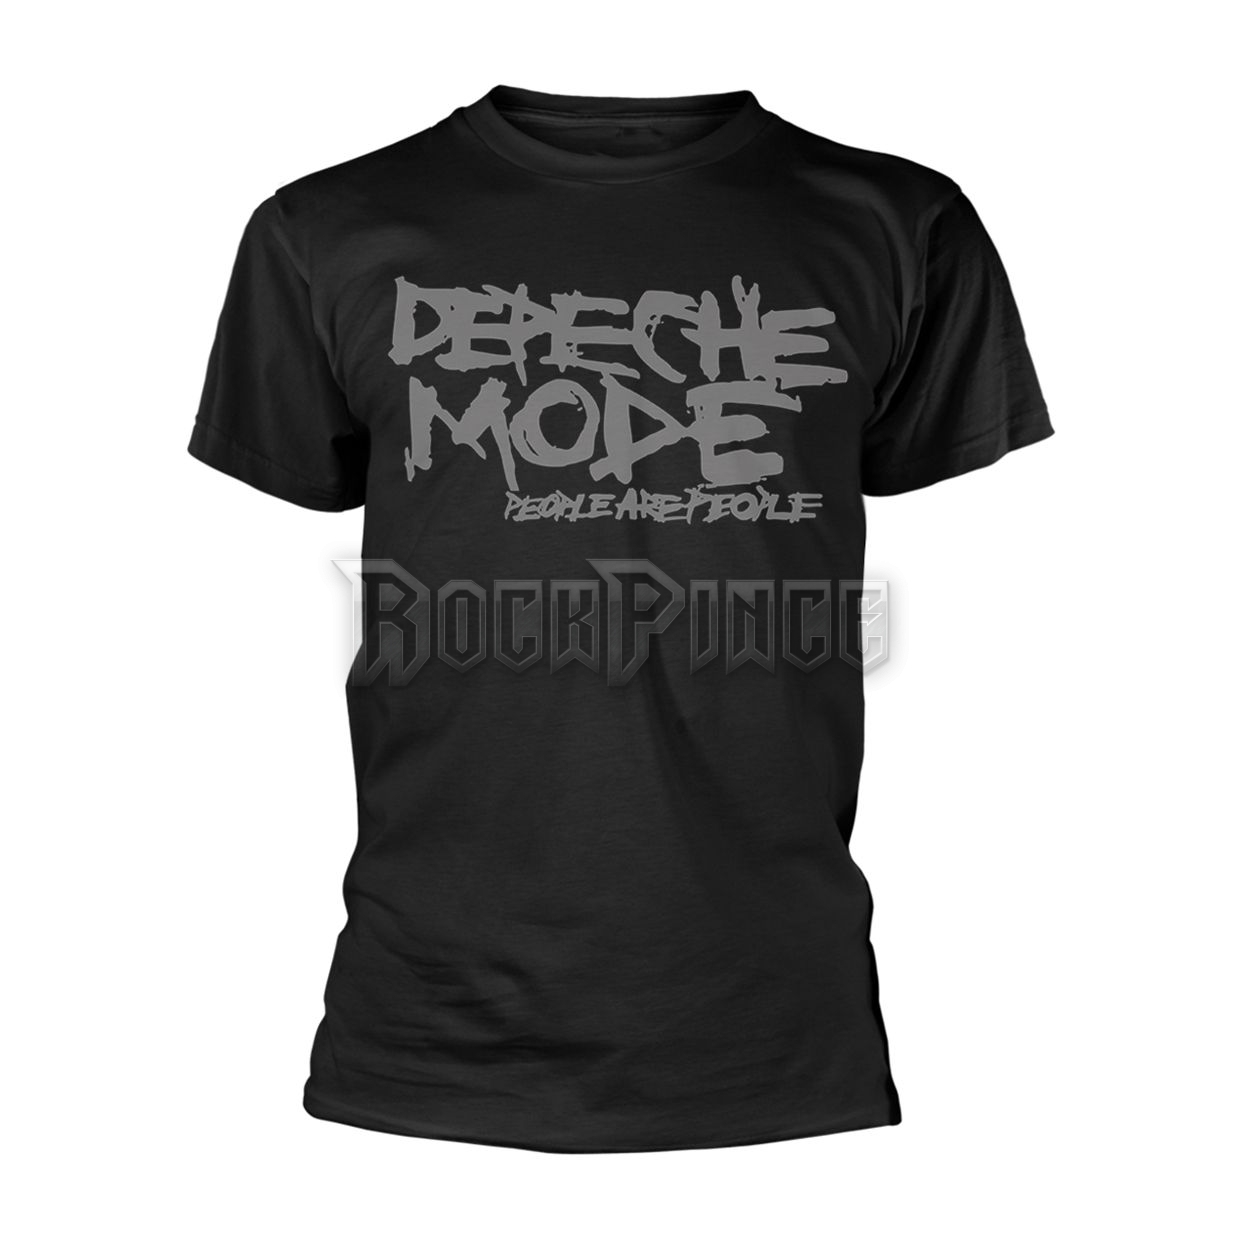 DEPECHE MODE - PEOPLE ARE PEOPLE - RTDMO004